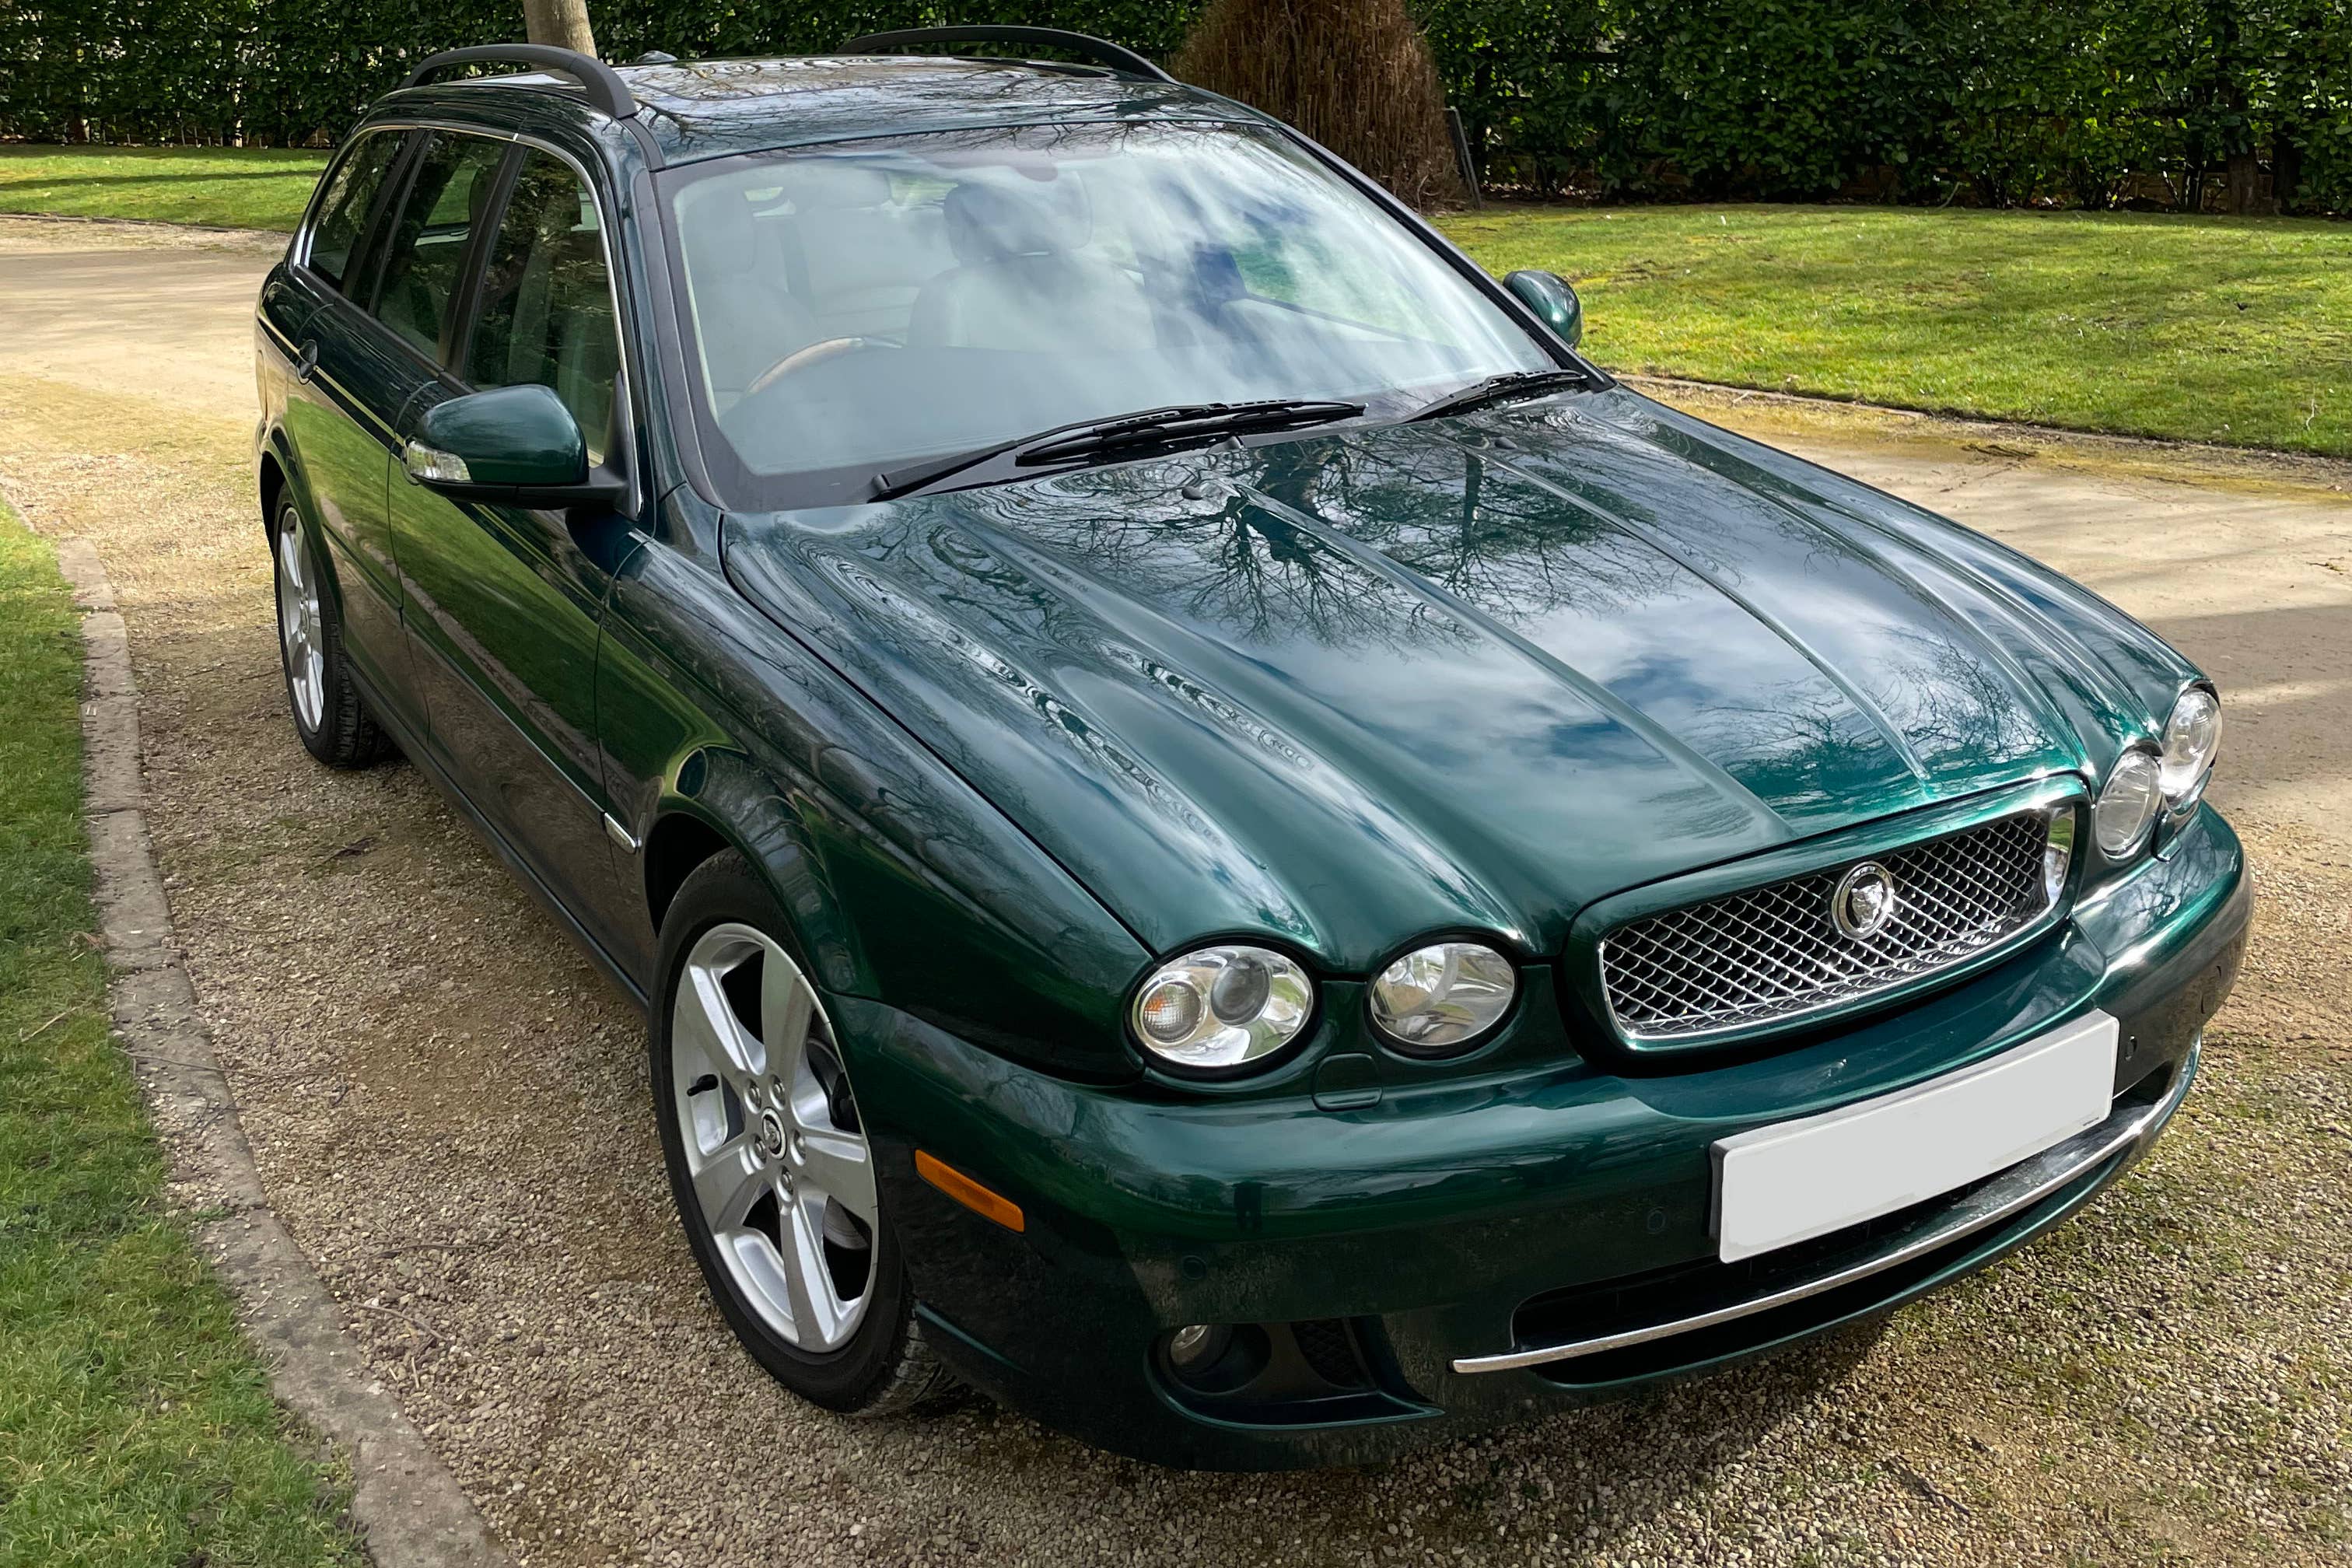 The Jaguar X-Type was first owned and used by Queen Elizabeth II (Comic Relief/PA)